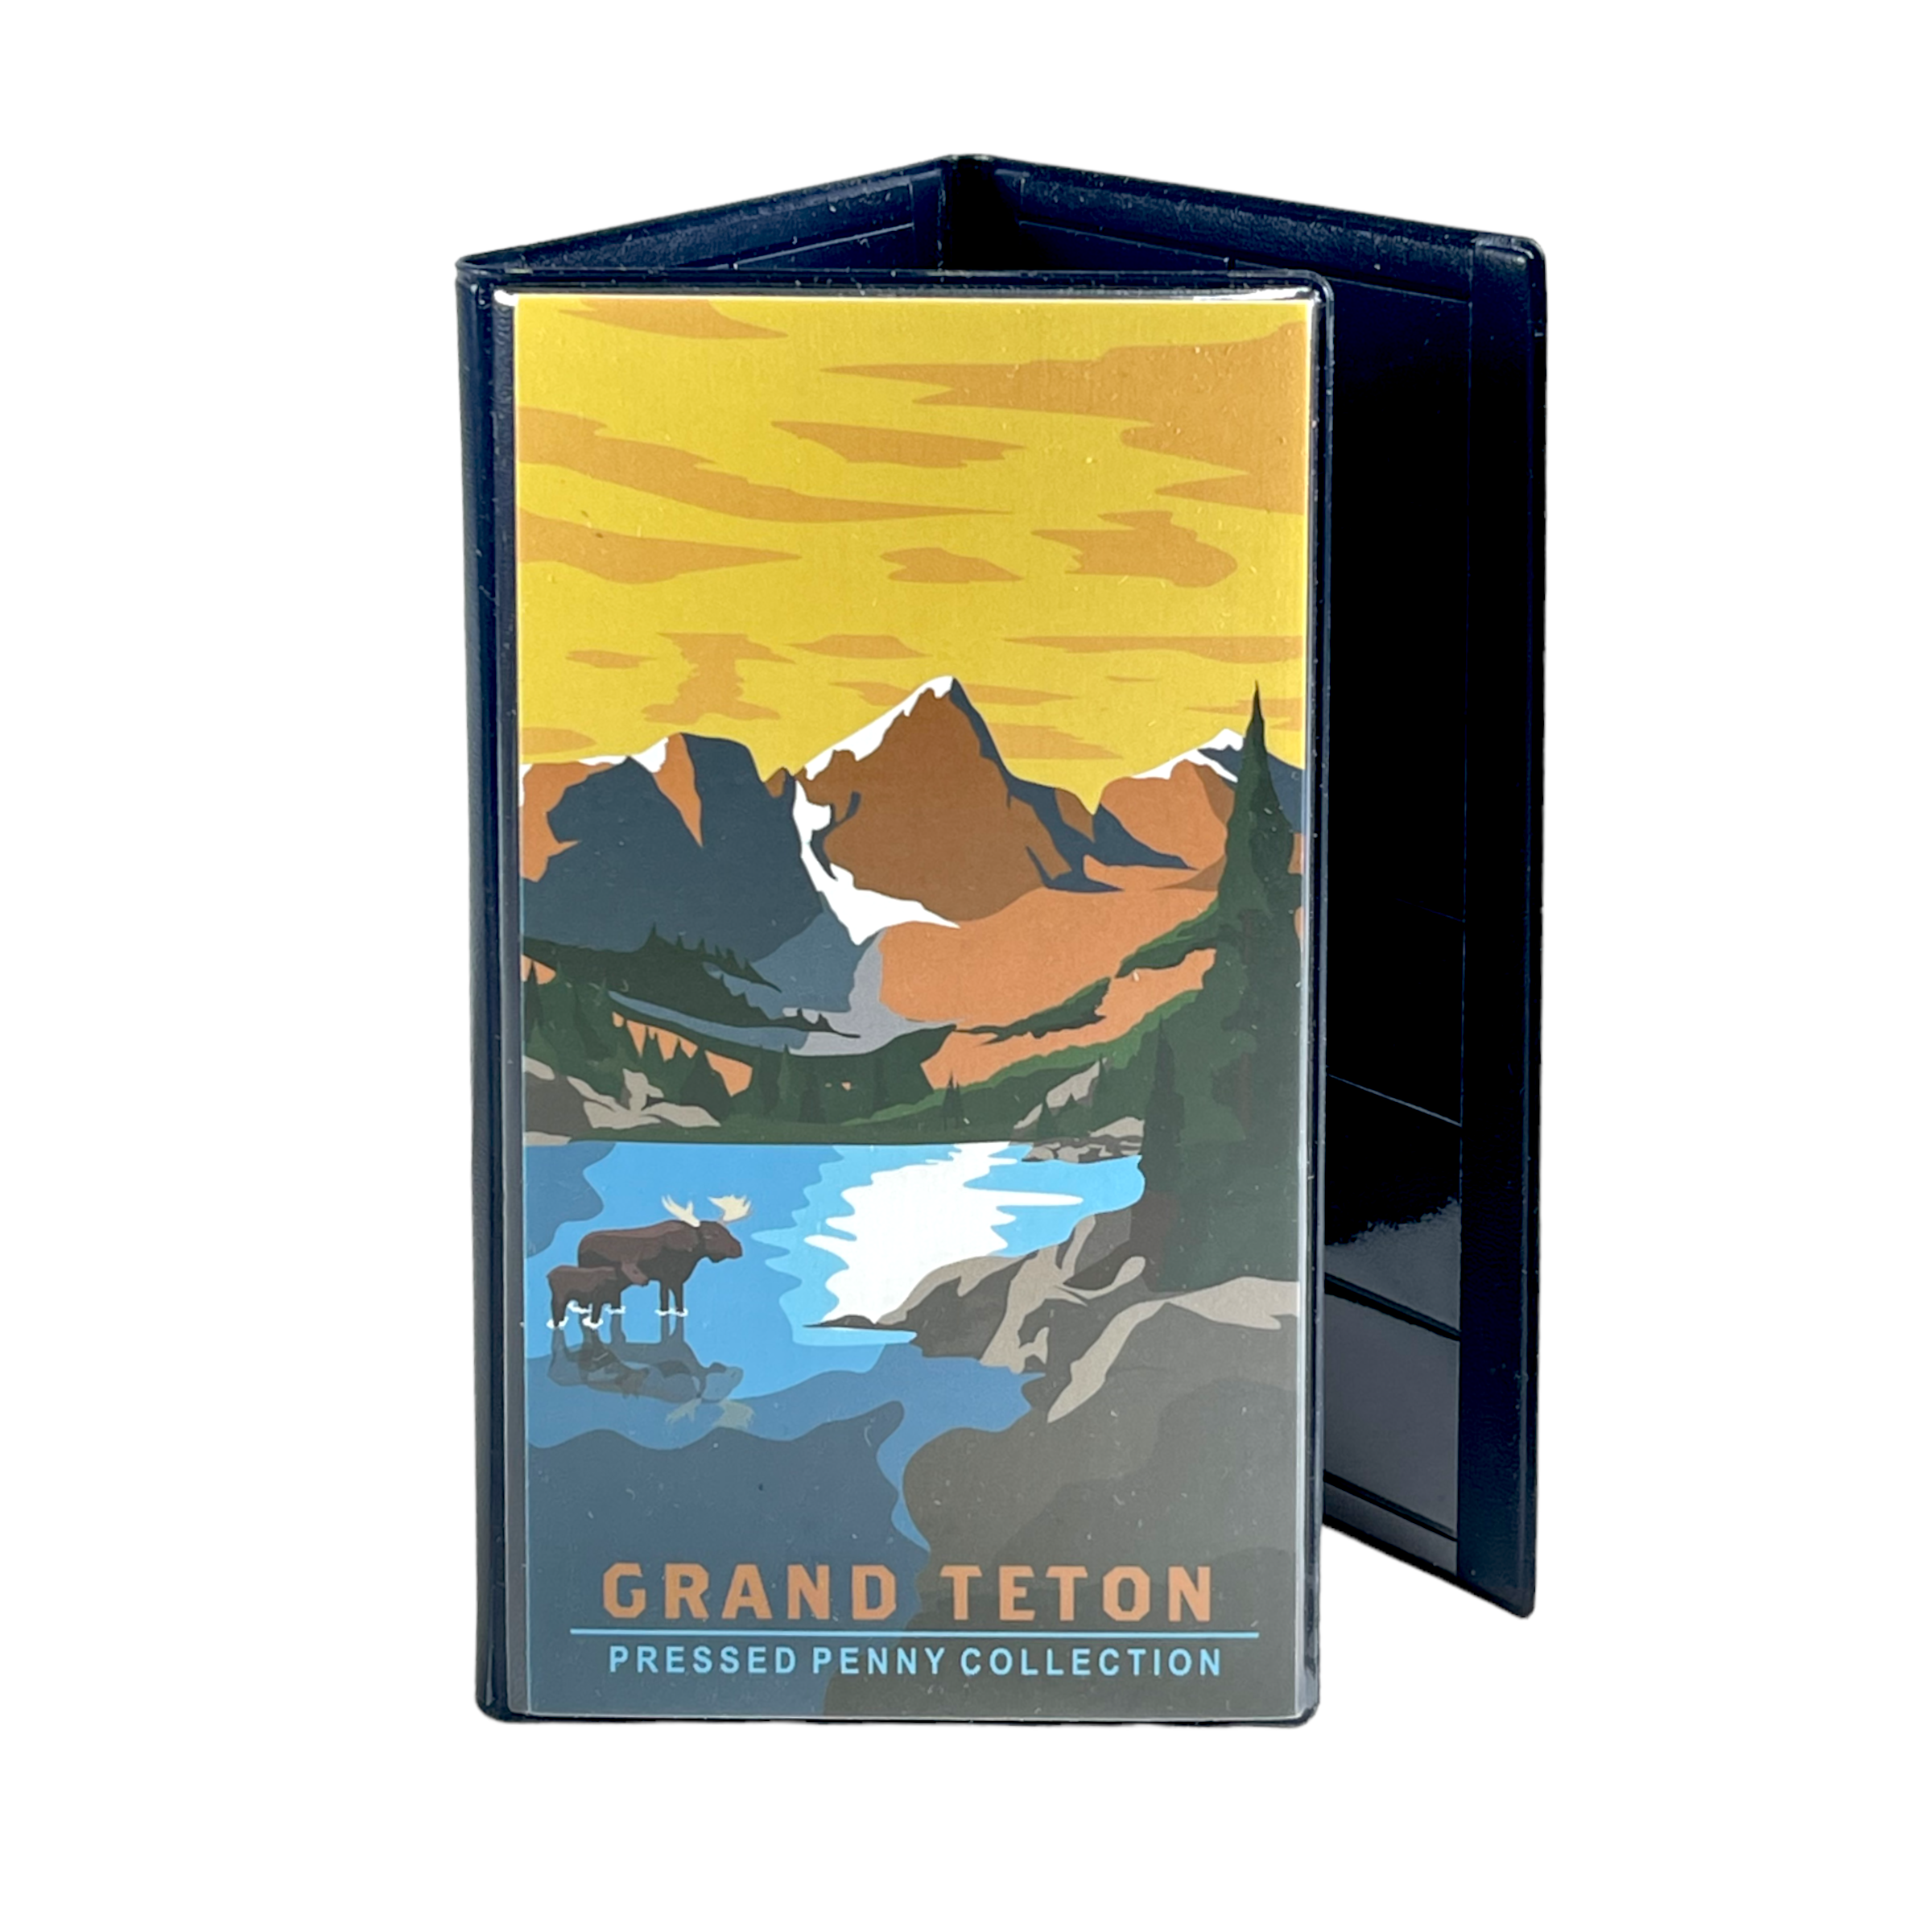 Penny Collector book classic Penny Passport Tri-Fold style by